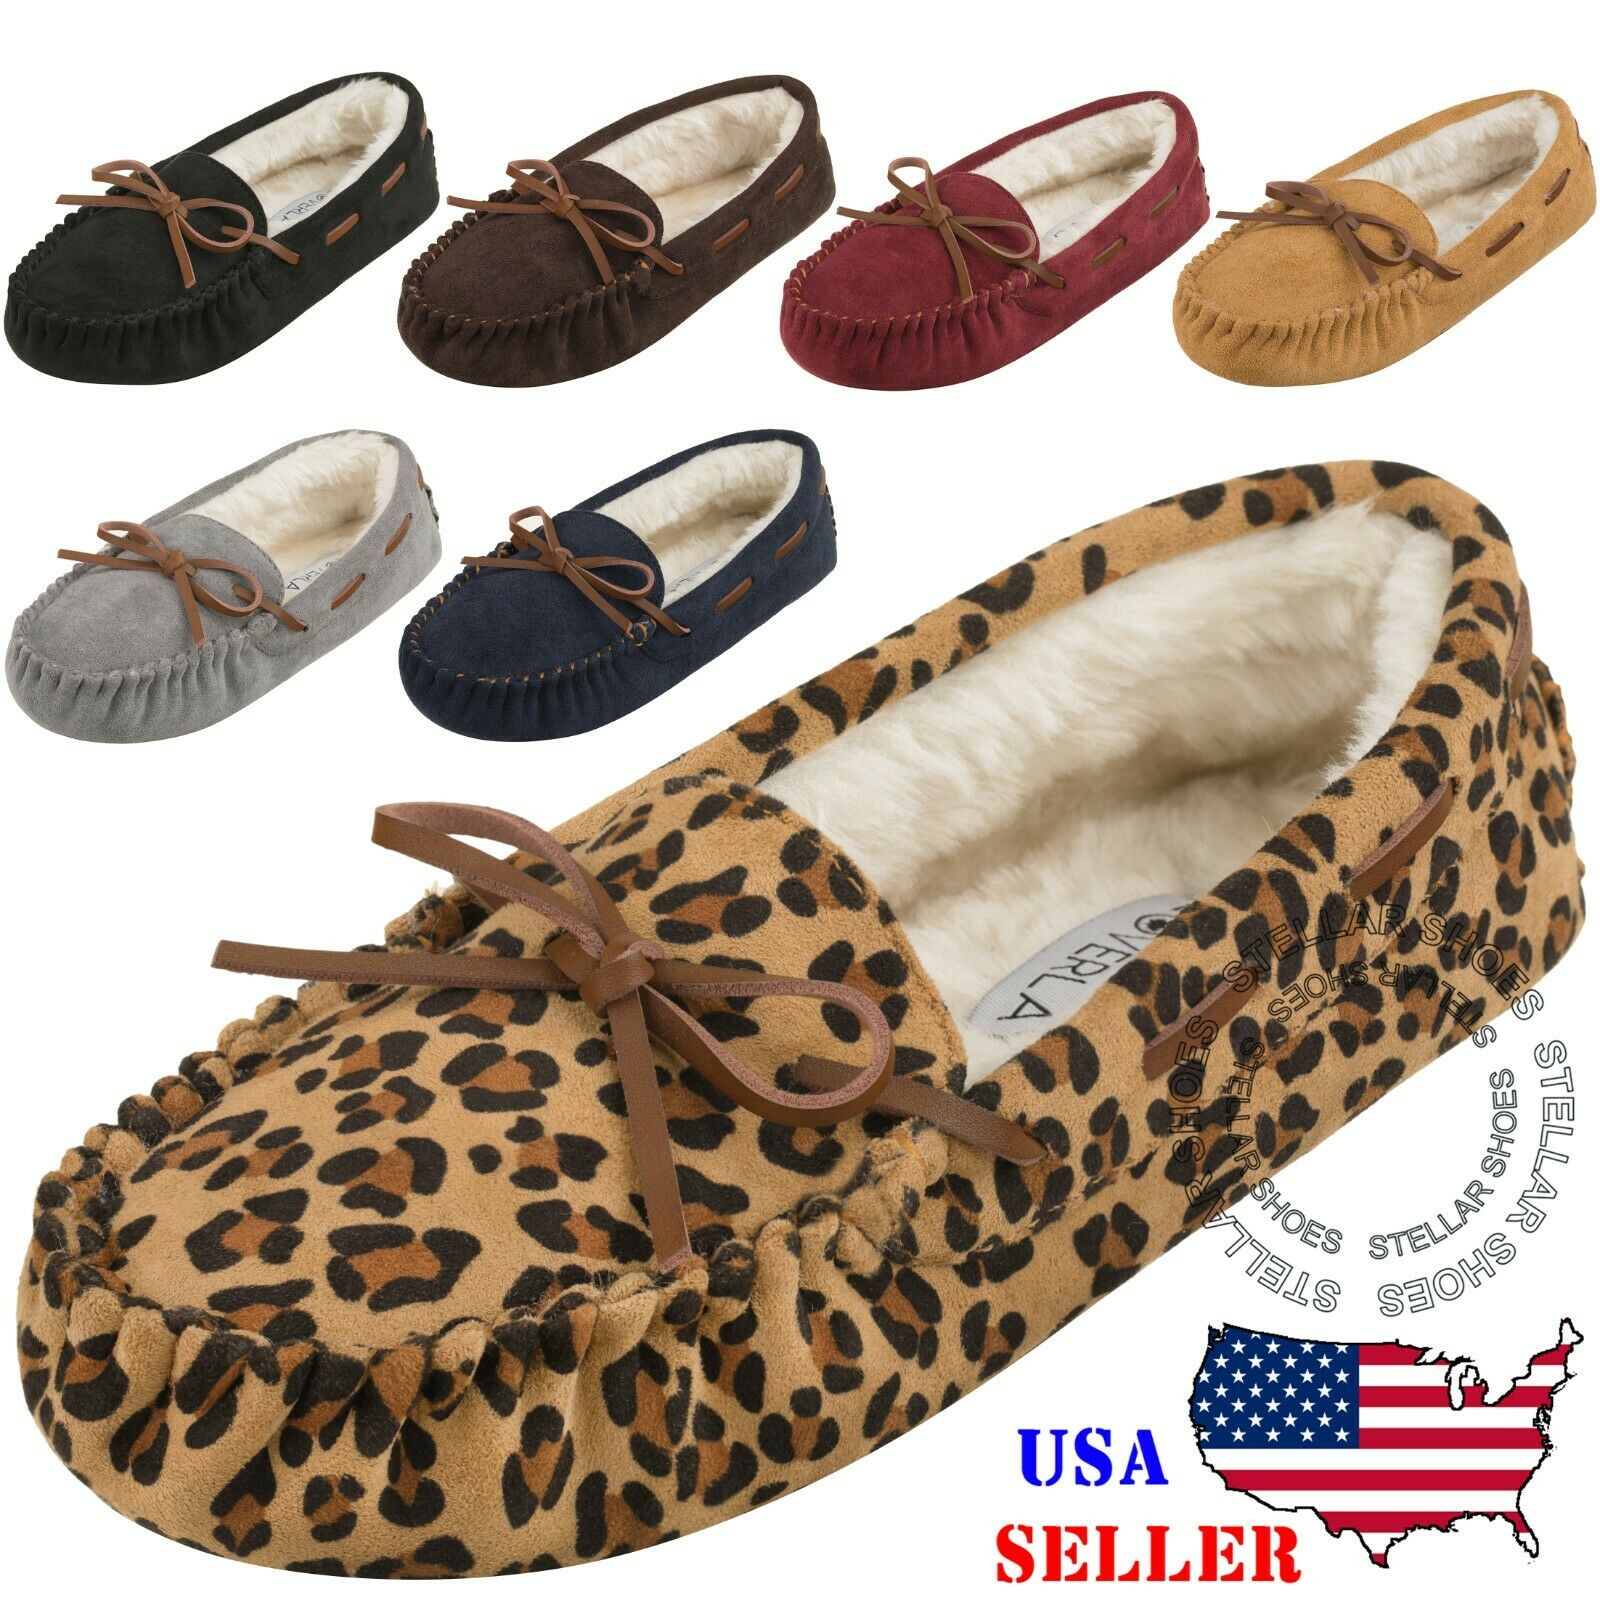 [new] Cloverlay Women's Moccasin Faux Fur Slippers Moccasin Comfortable Slippers